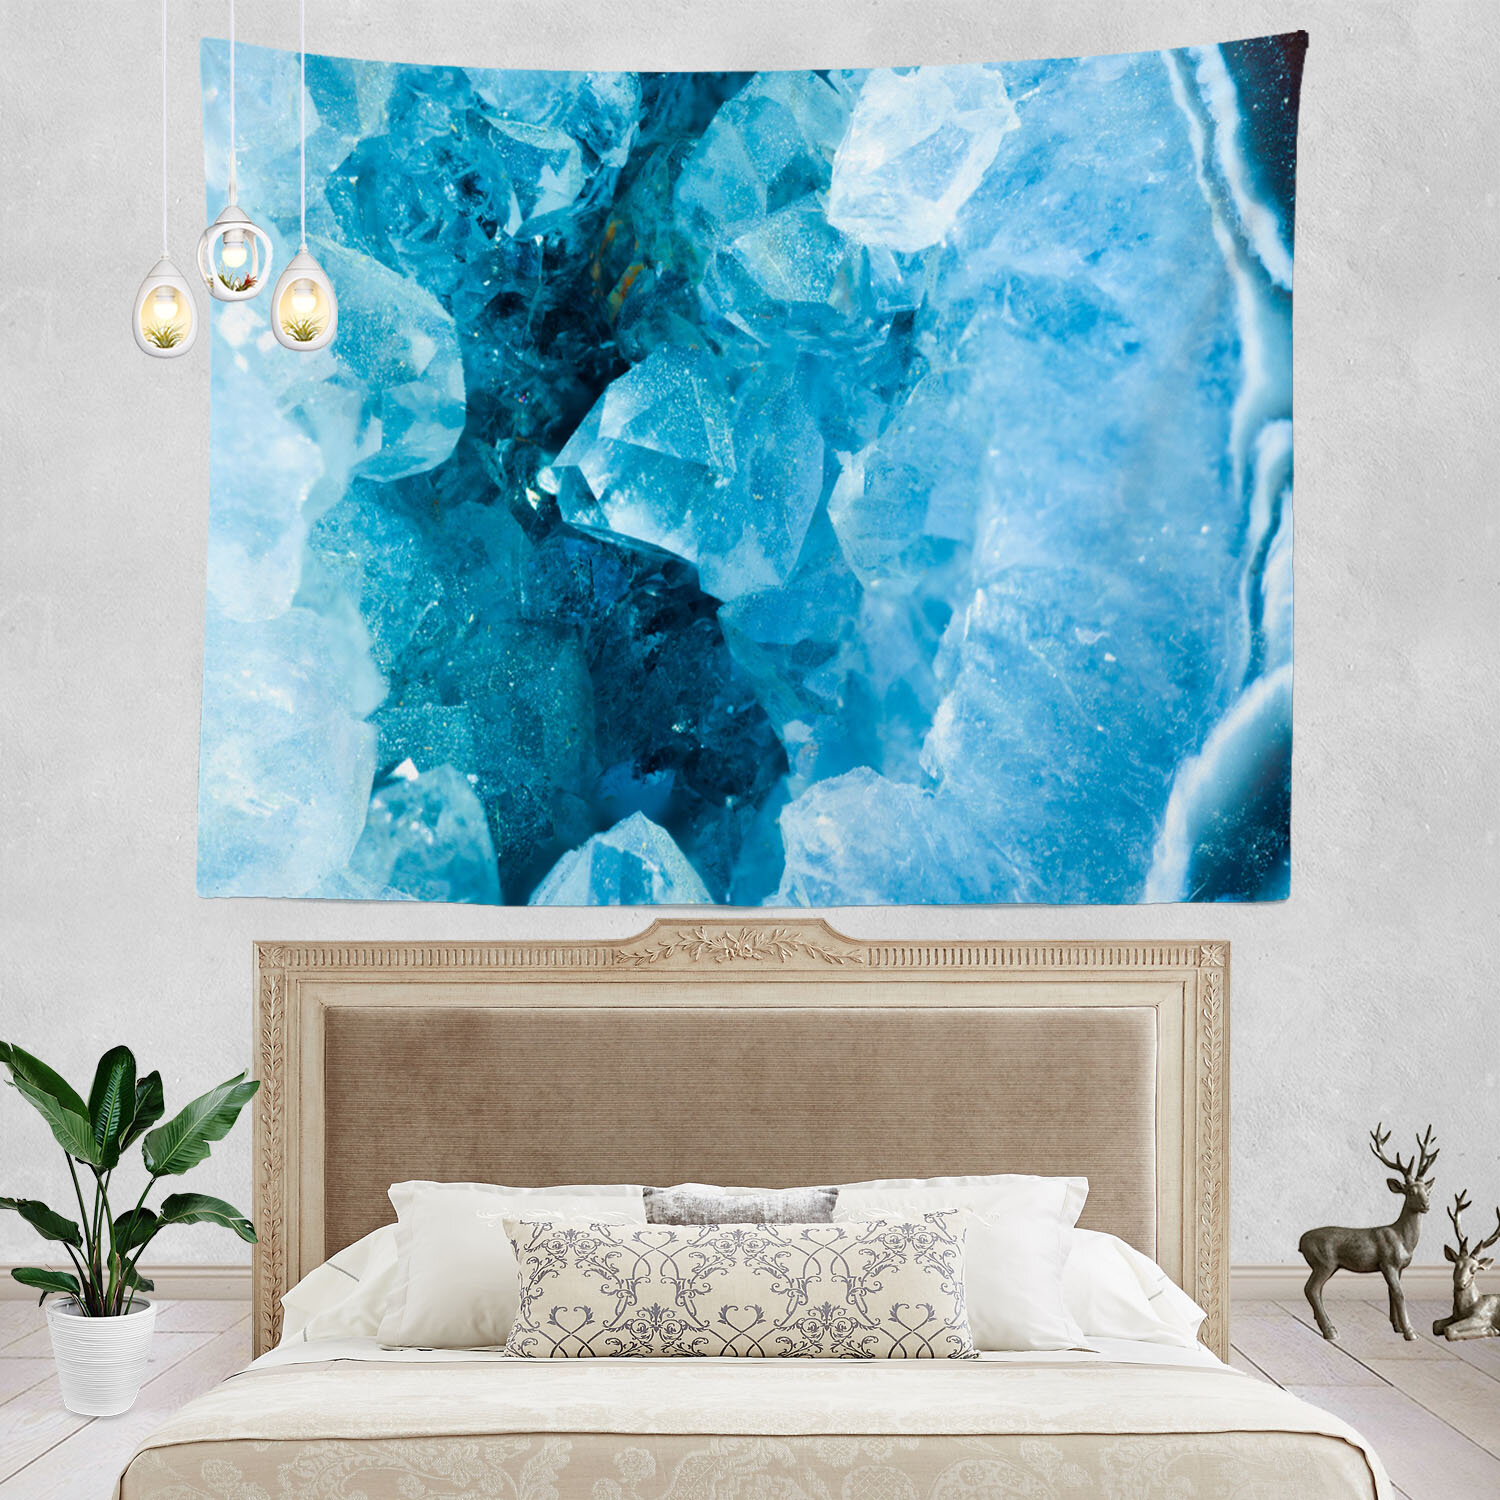 Lightning Storm Wall Hanging Tapestry Psychedelic Bedroom Home Decoration